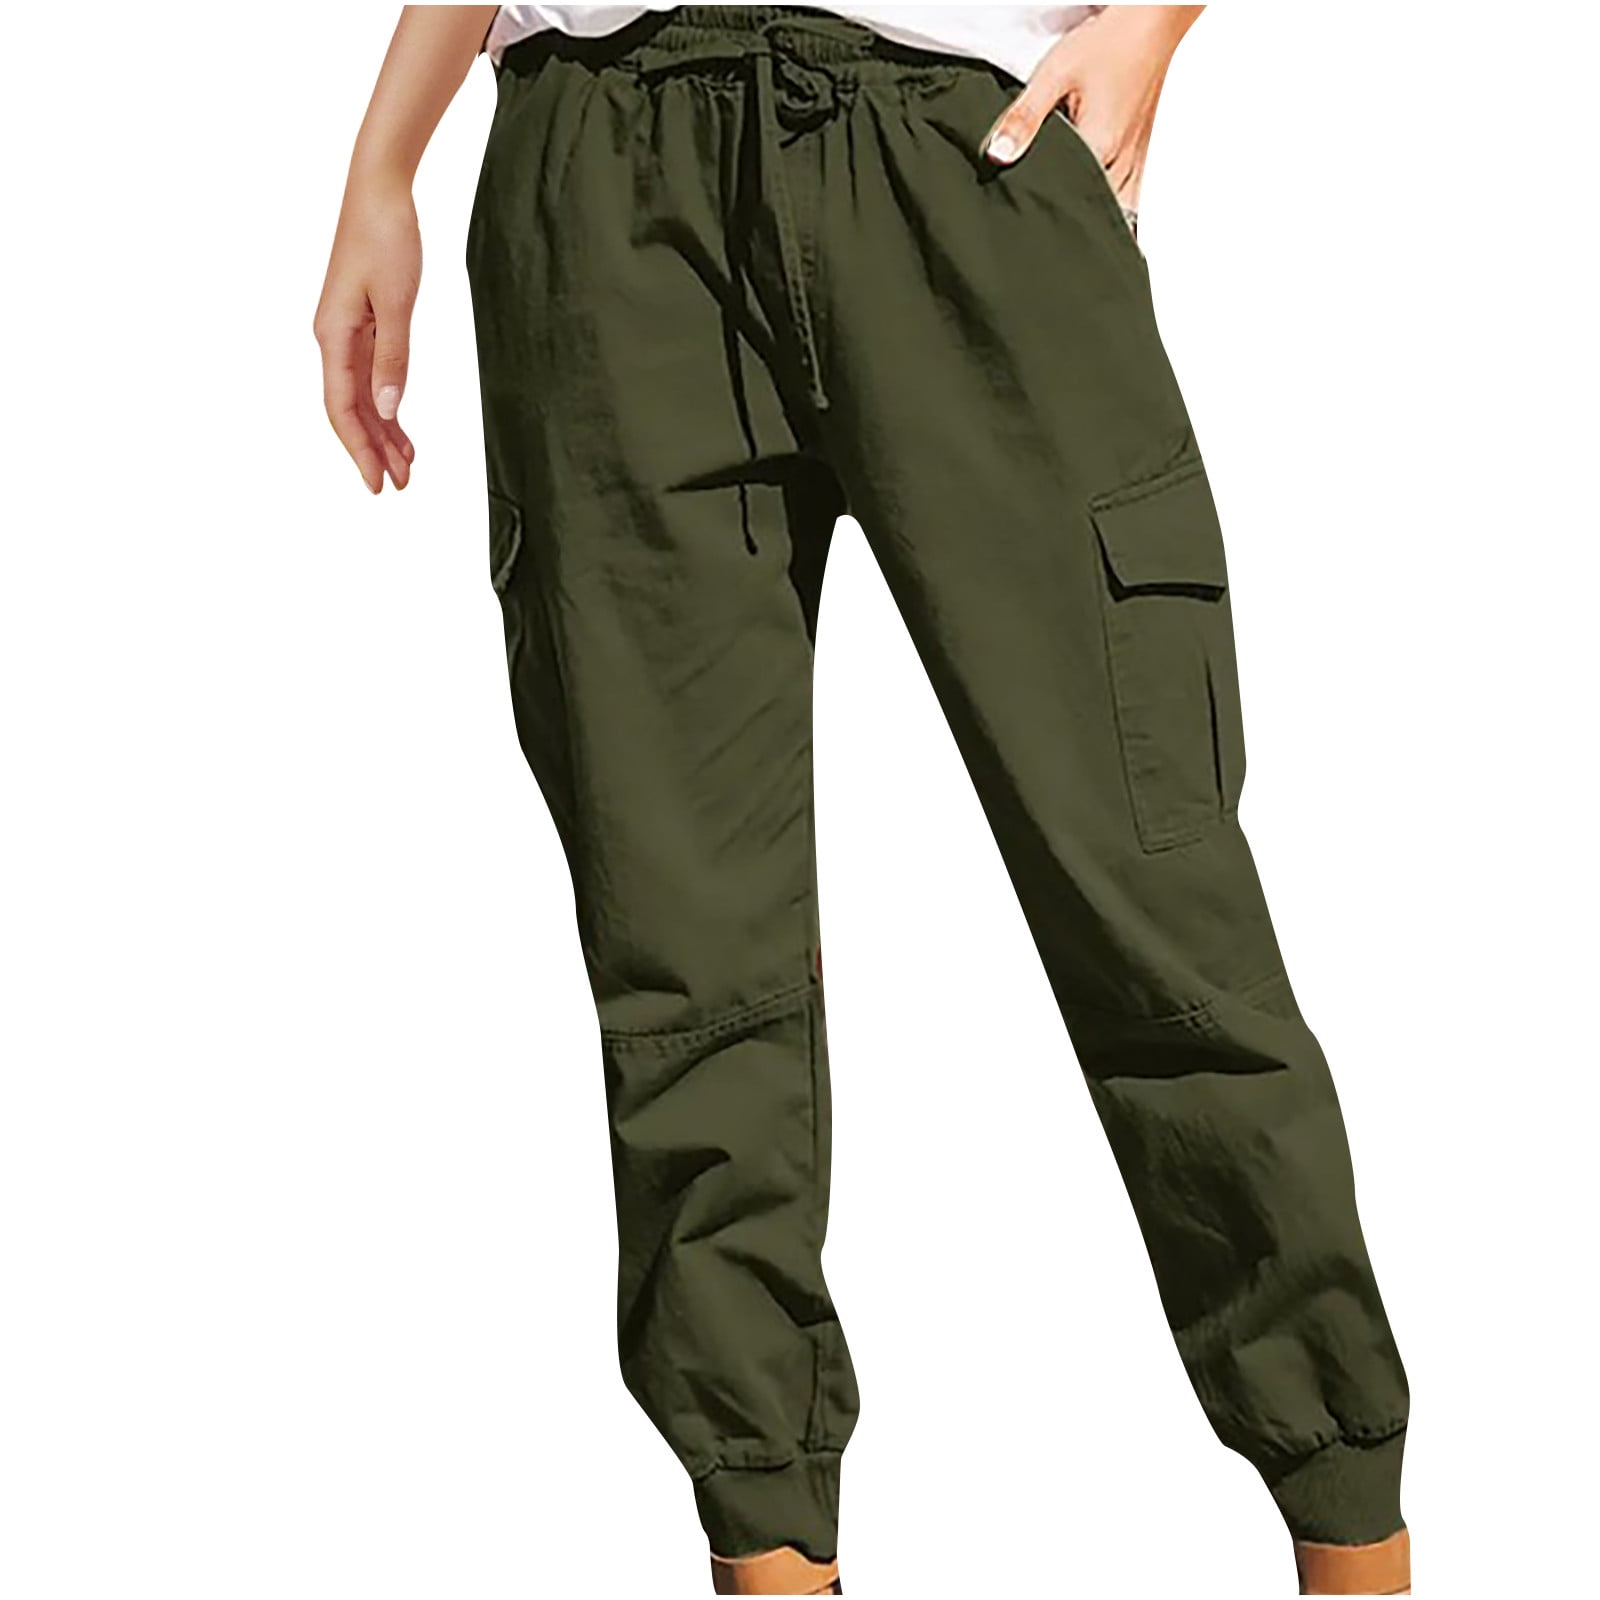 BUIgtTklOP Pants For Women Clearance Plus Size Drawstring Casual